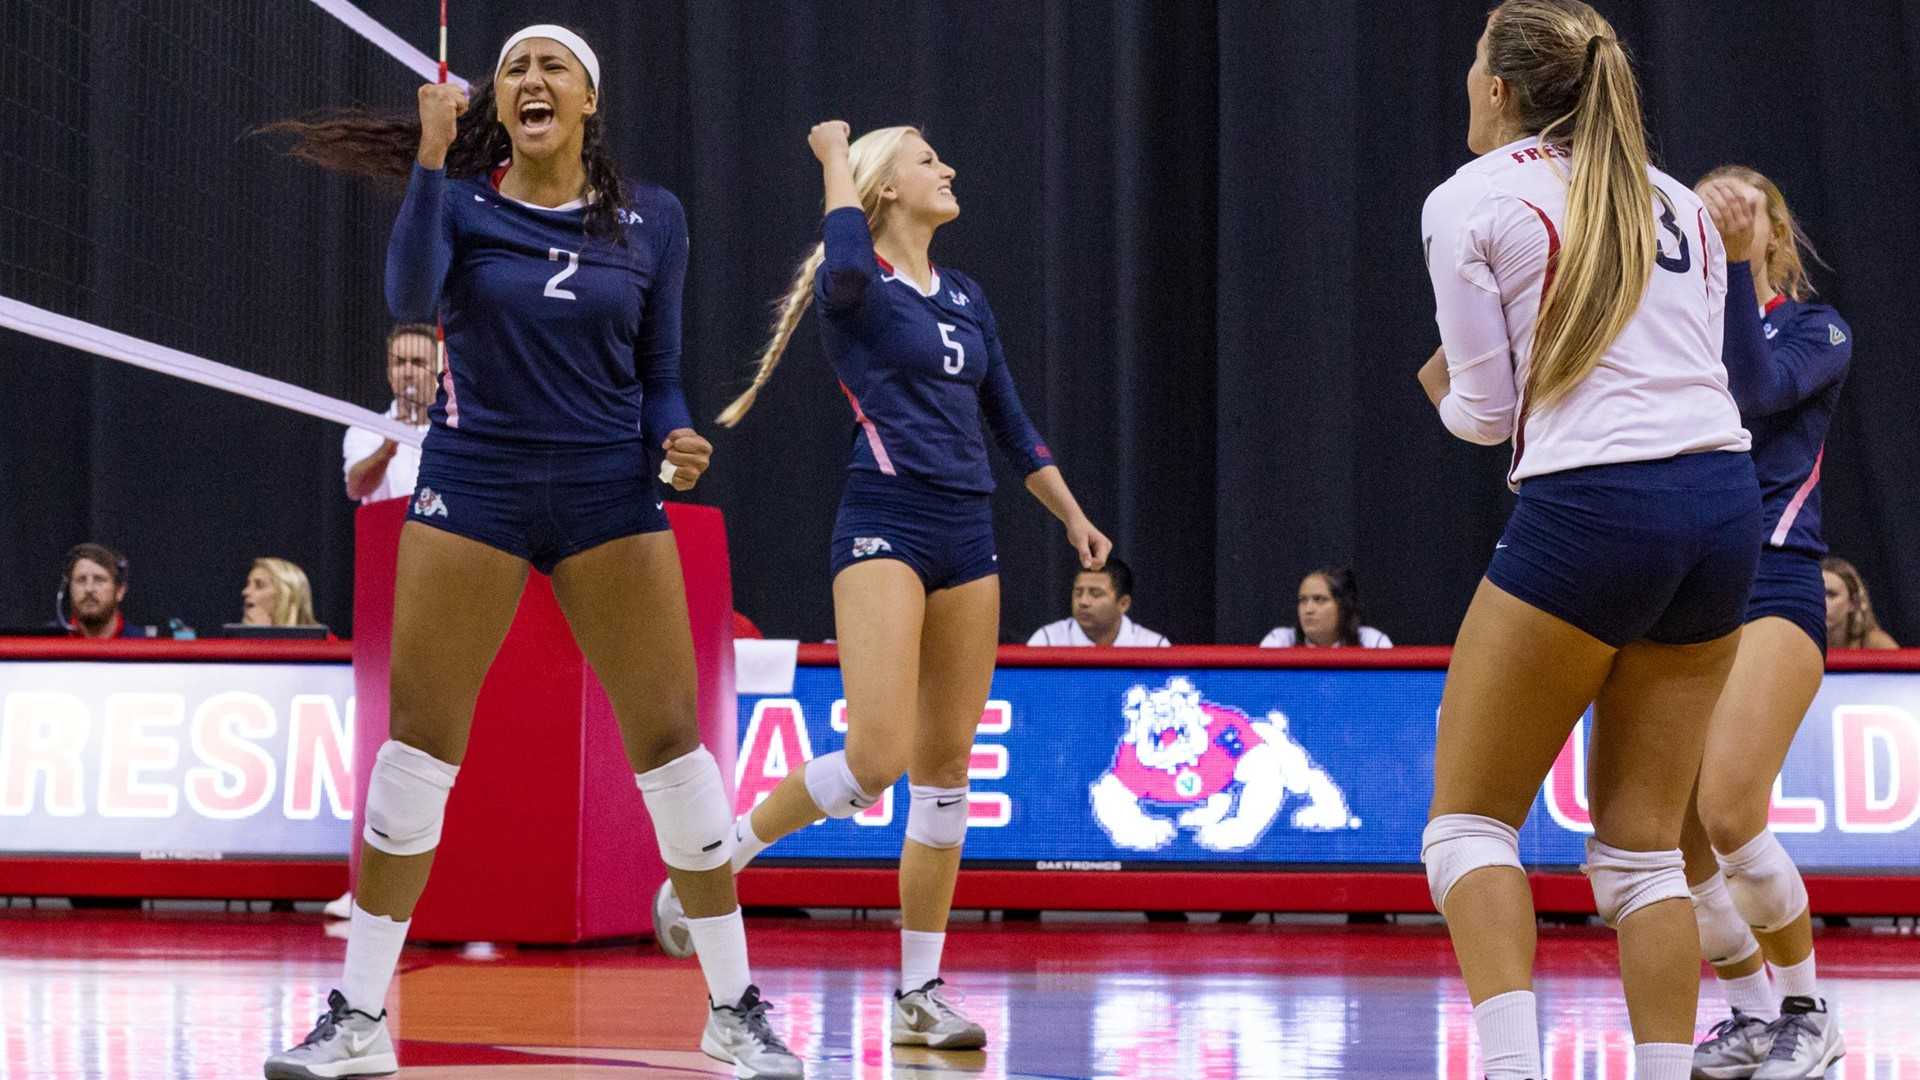 Lauren Torres (#2) and Madelyn Halteman (#5) celebrate with teammates after securing a win in their final nonconference  game. (Courtesy of Fresno State Athletics)